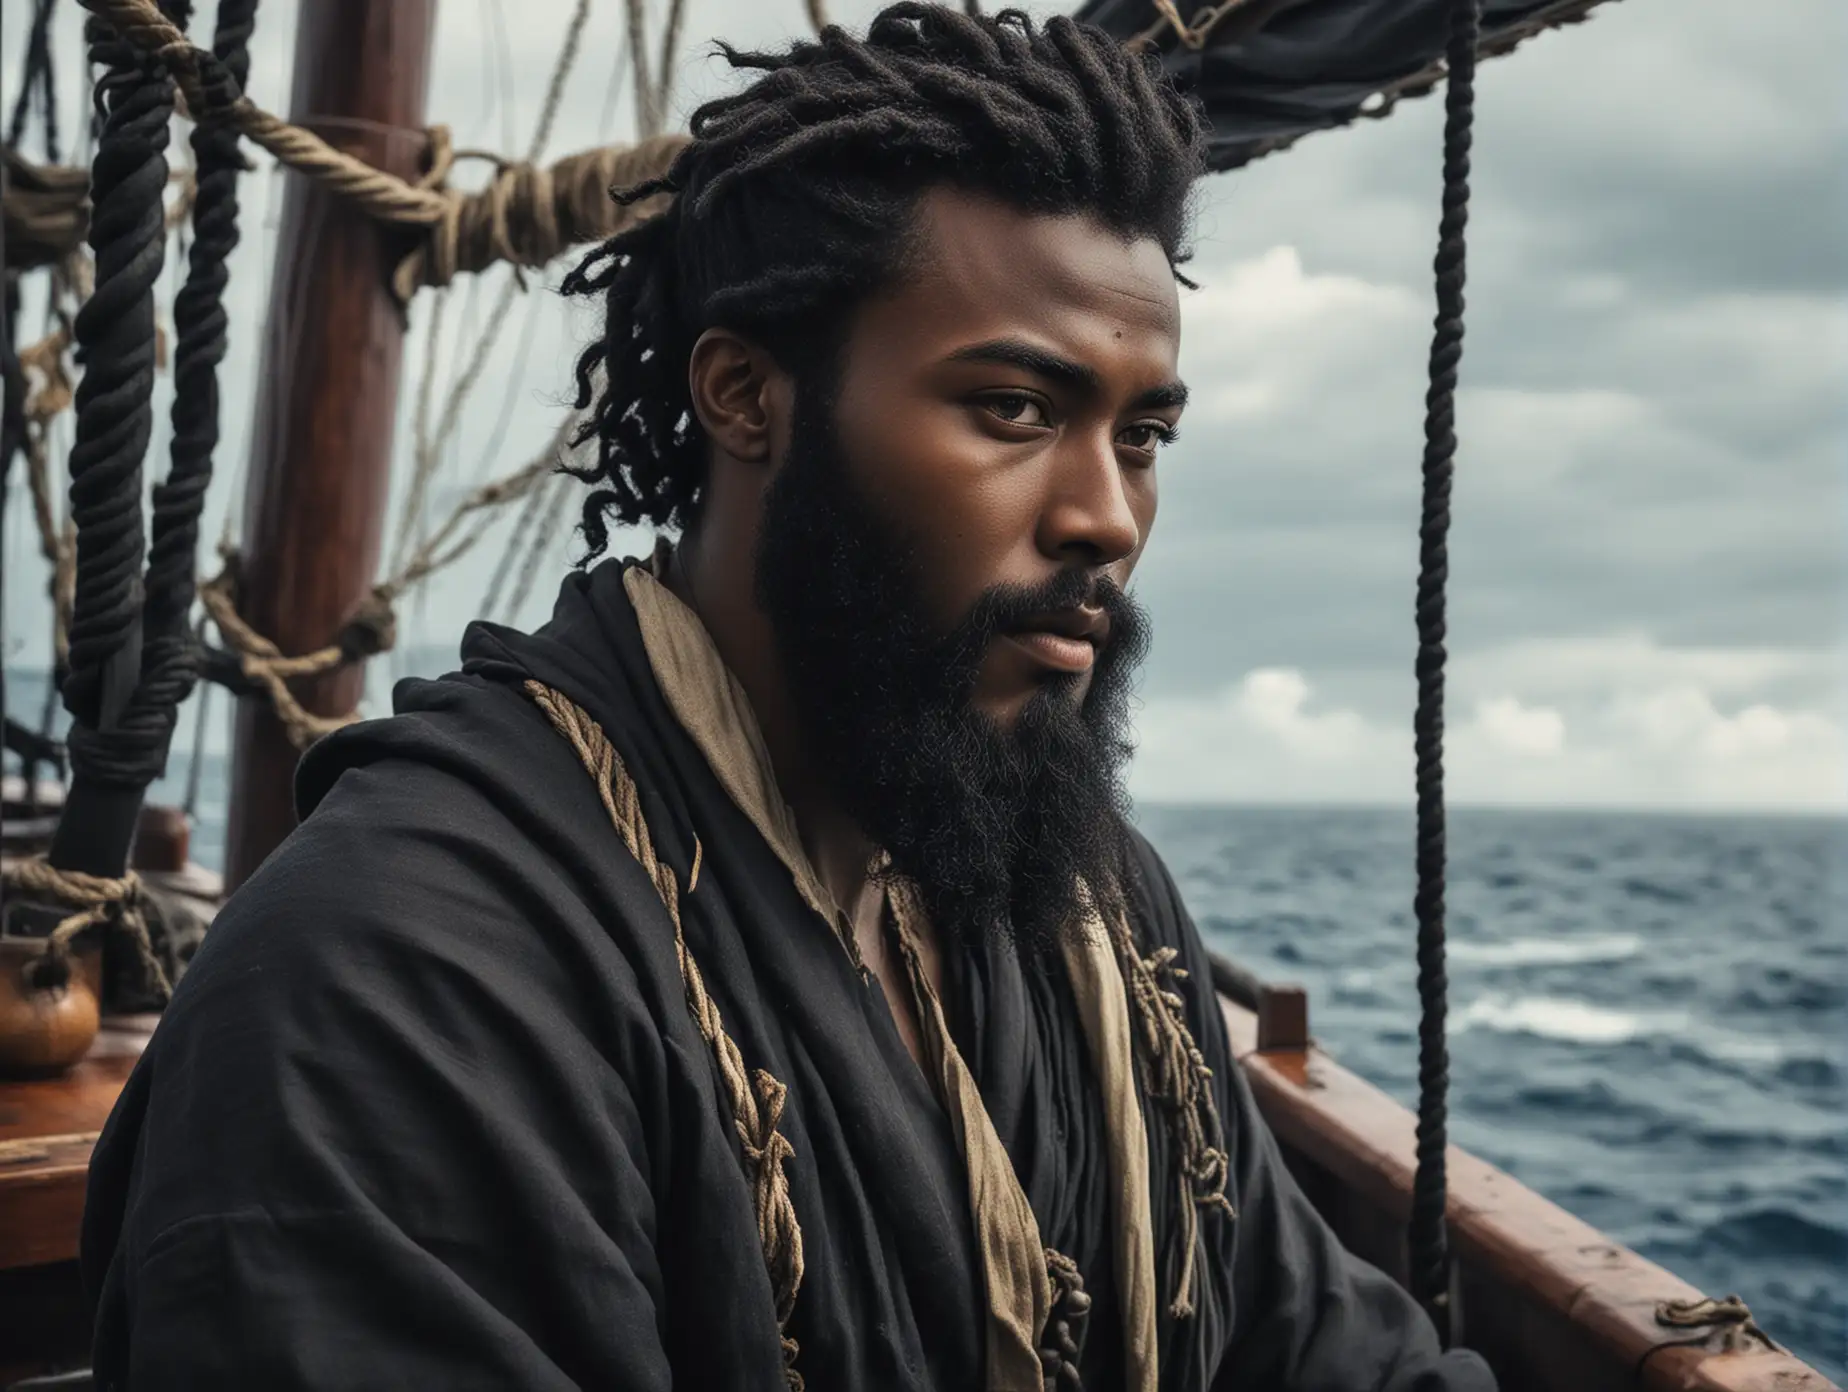 Handsome Black MASA Musa with a beard traveling on ships through the ocean with his men